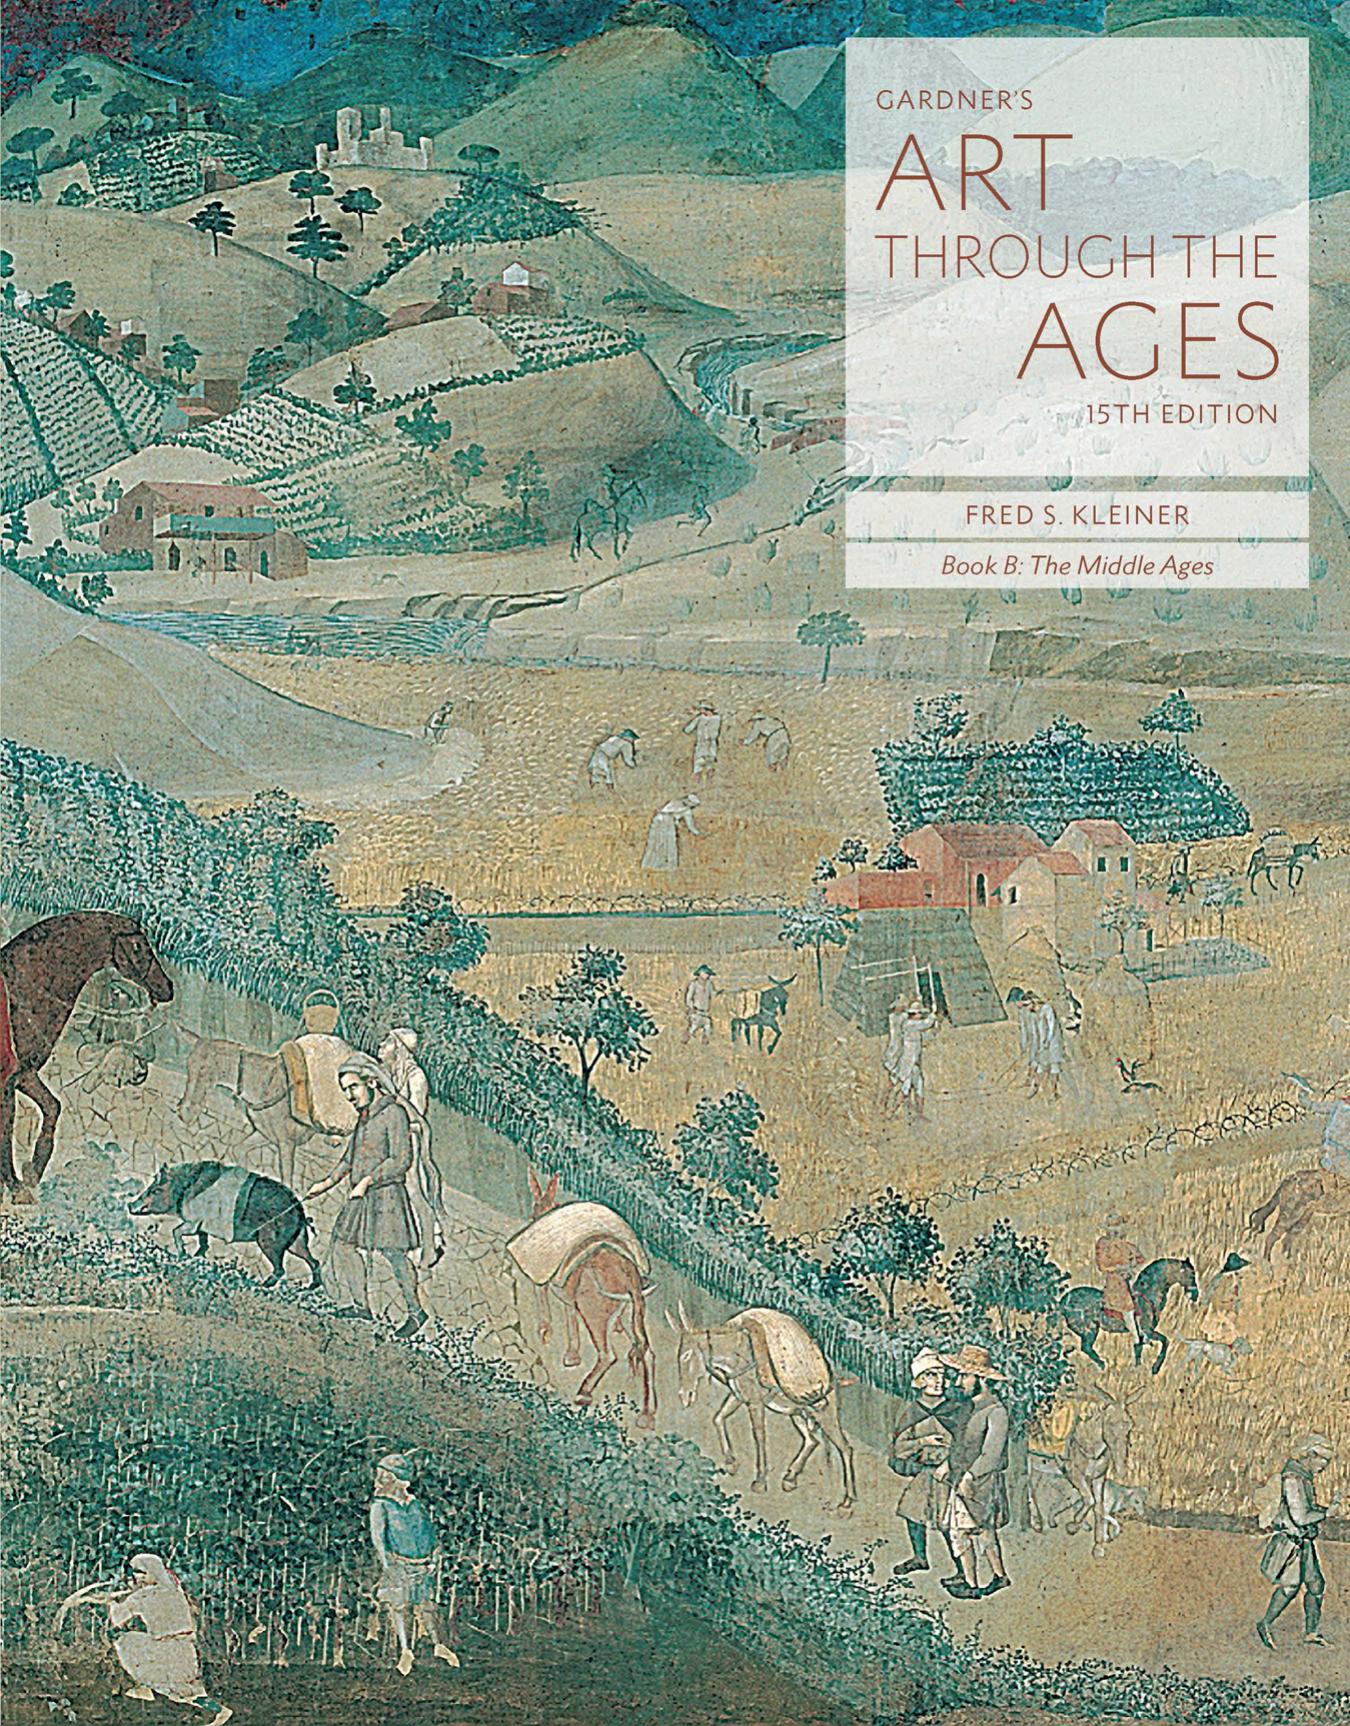 Gardner's Art through the Ages Backpack Edition, Book B The Middle Ages 15e.jpg